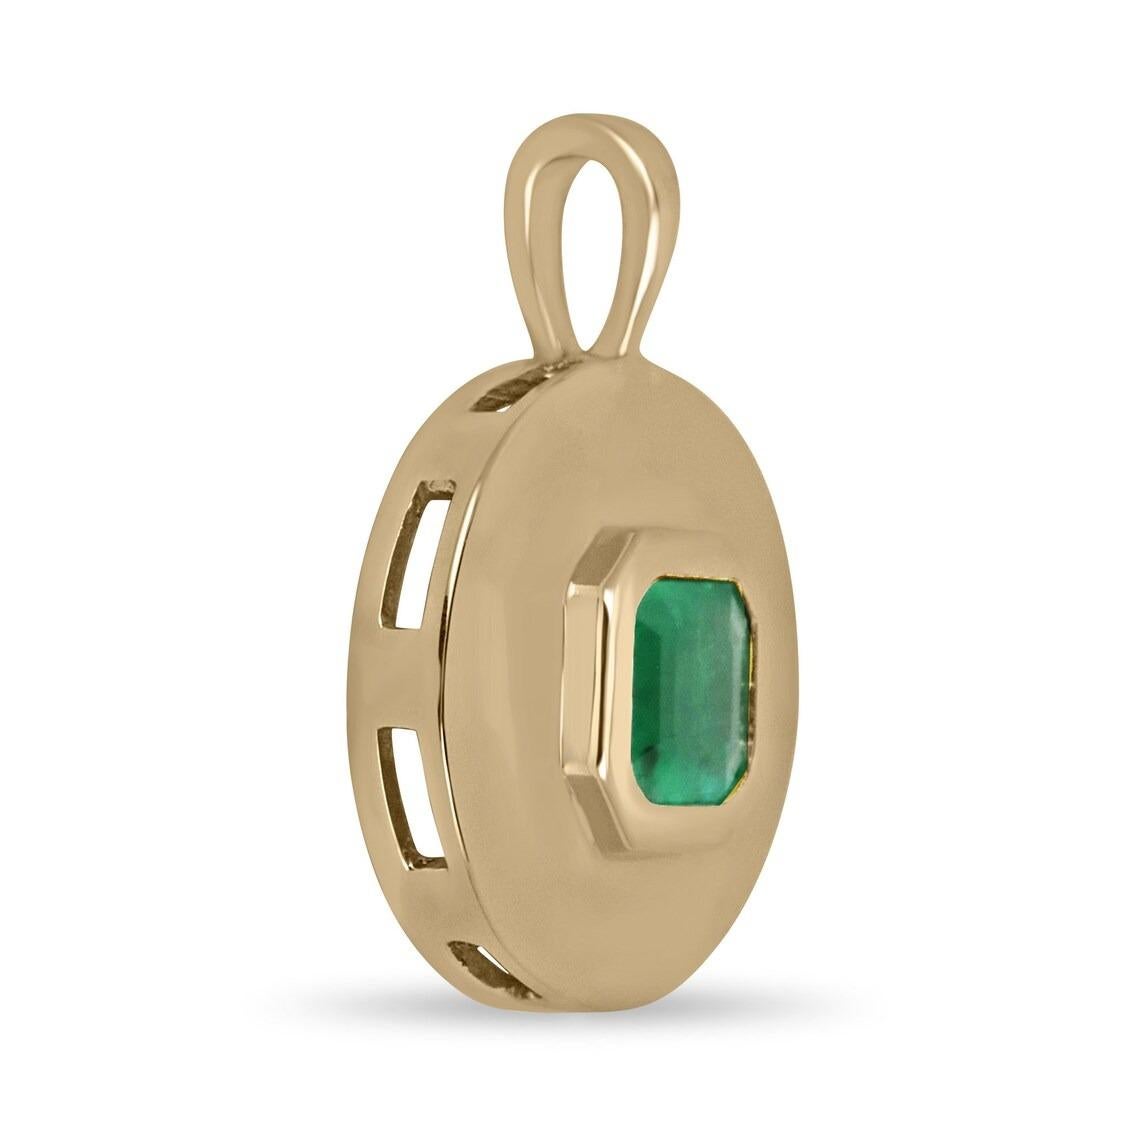 A stunning solitaire emerald pendant. This lovely piece showcases a remarkable natural asscher-cut emerald of the origin of Colombia. The gemstone displays a remarkable vivid medium green color, followed by good clarity and luster. Carefully bezel